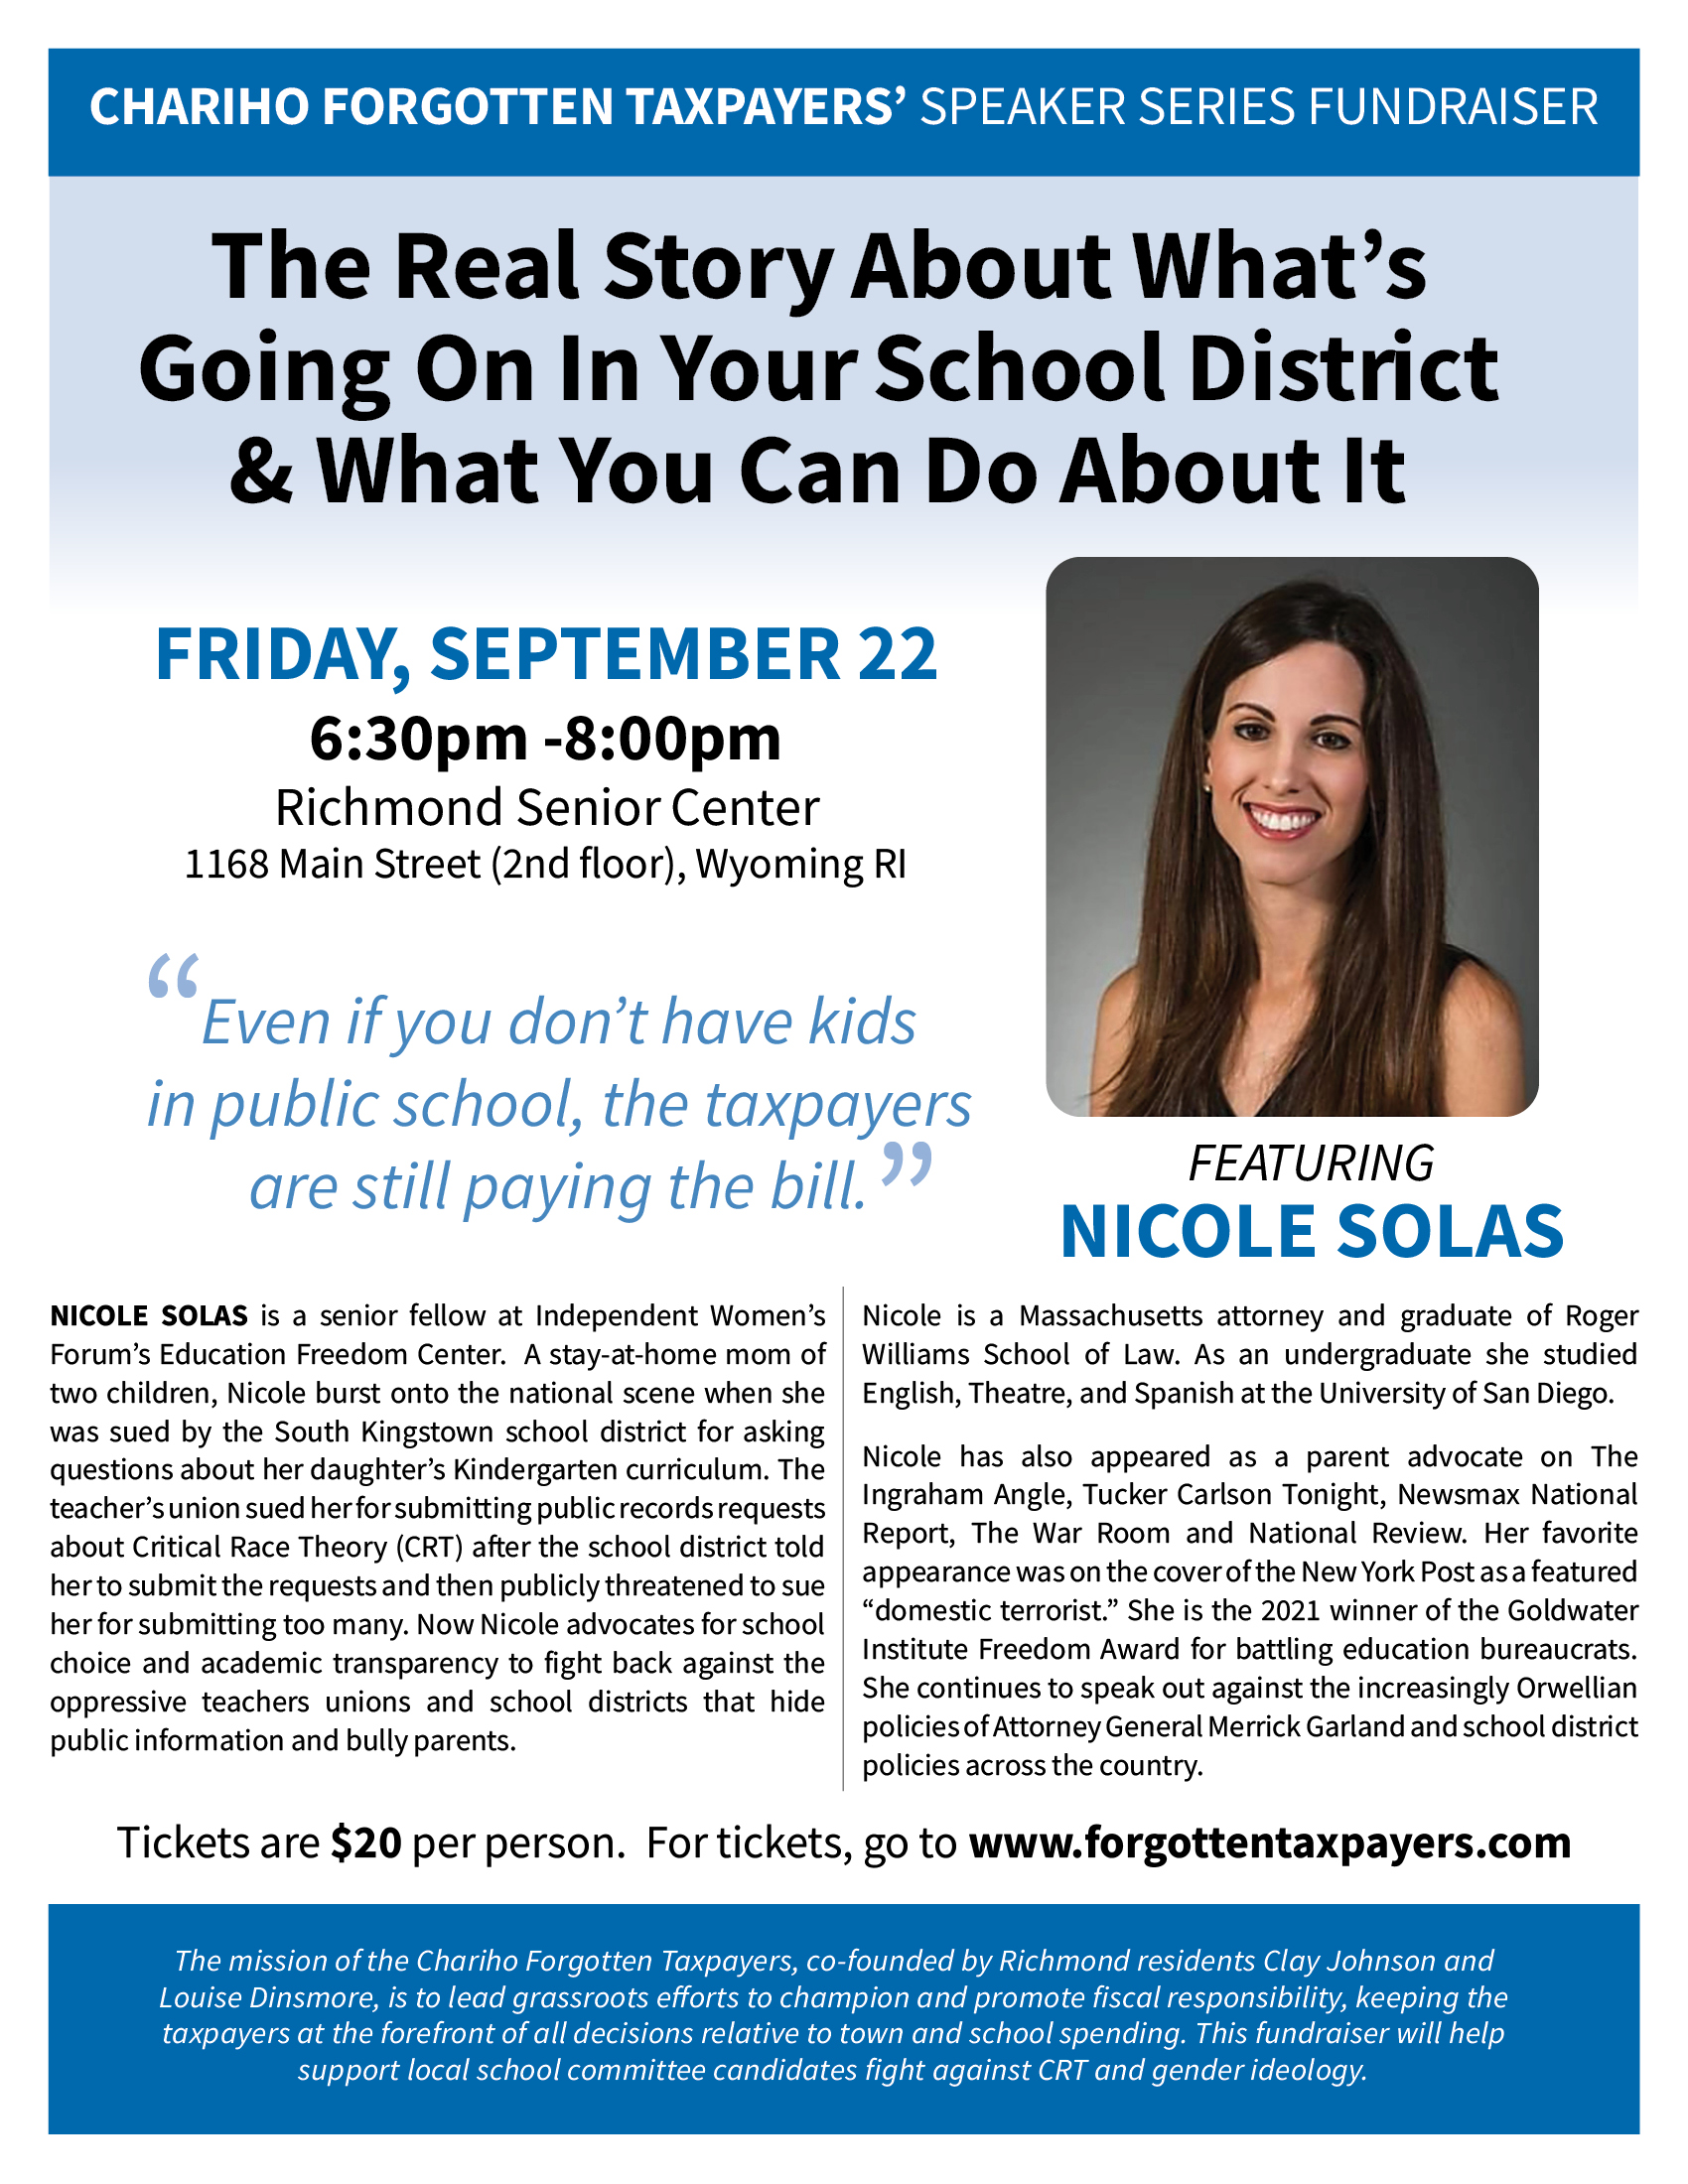 JOIN US! The REAL Story About What’s Going On In Your Rhode Island School District and What You Can Do About It